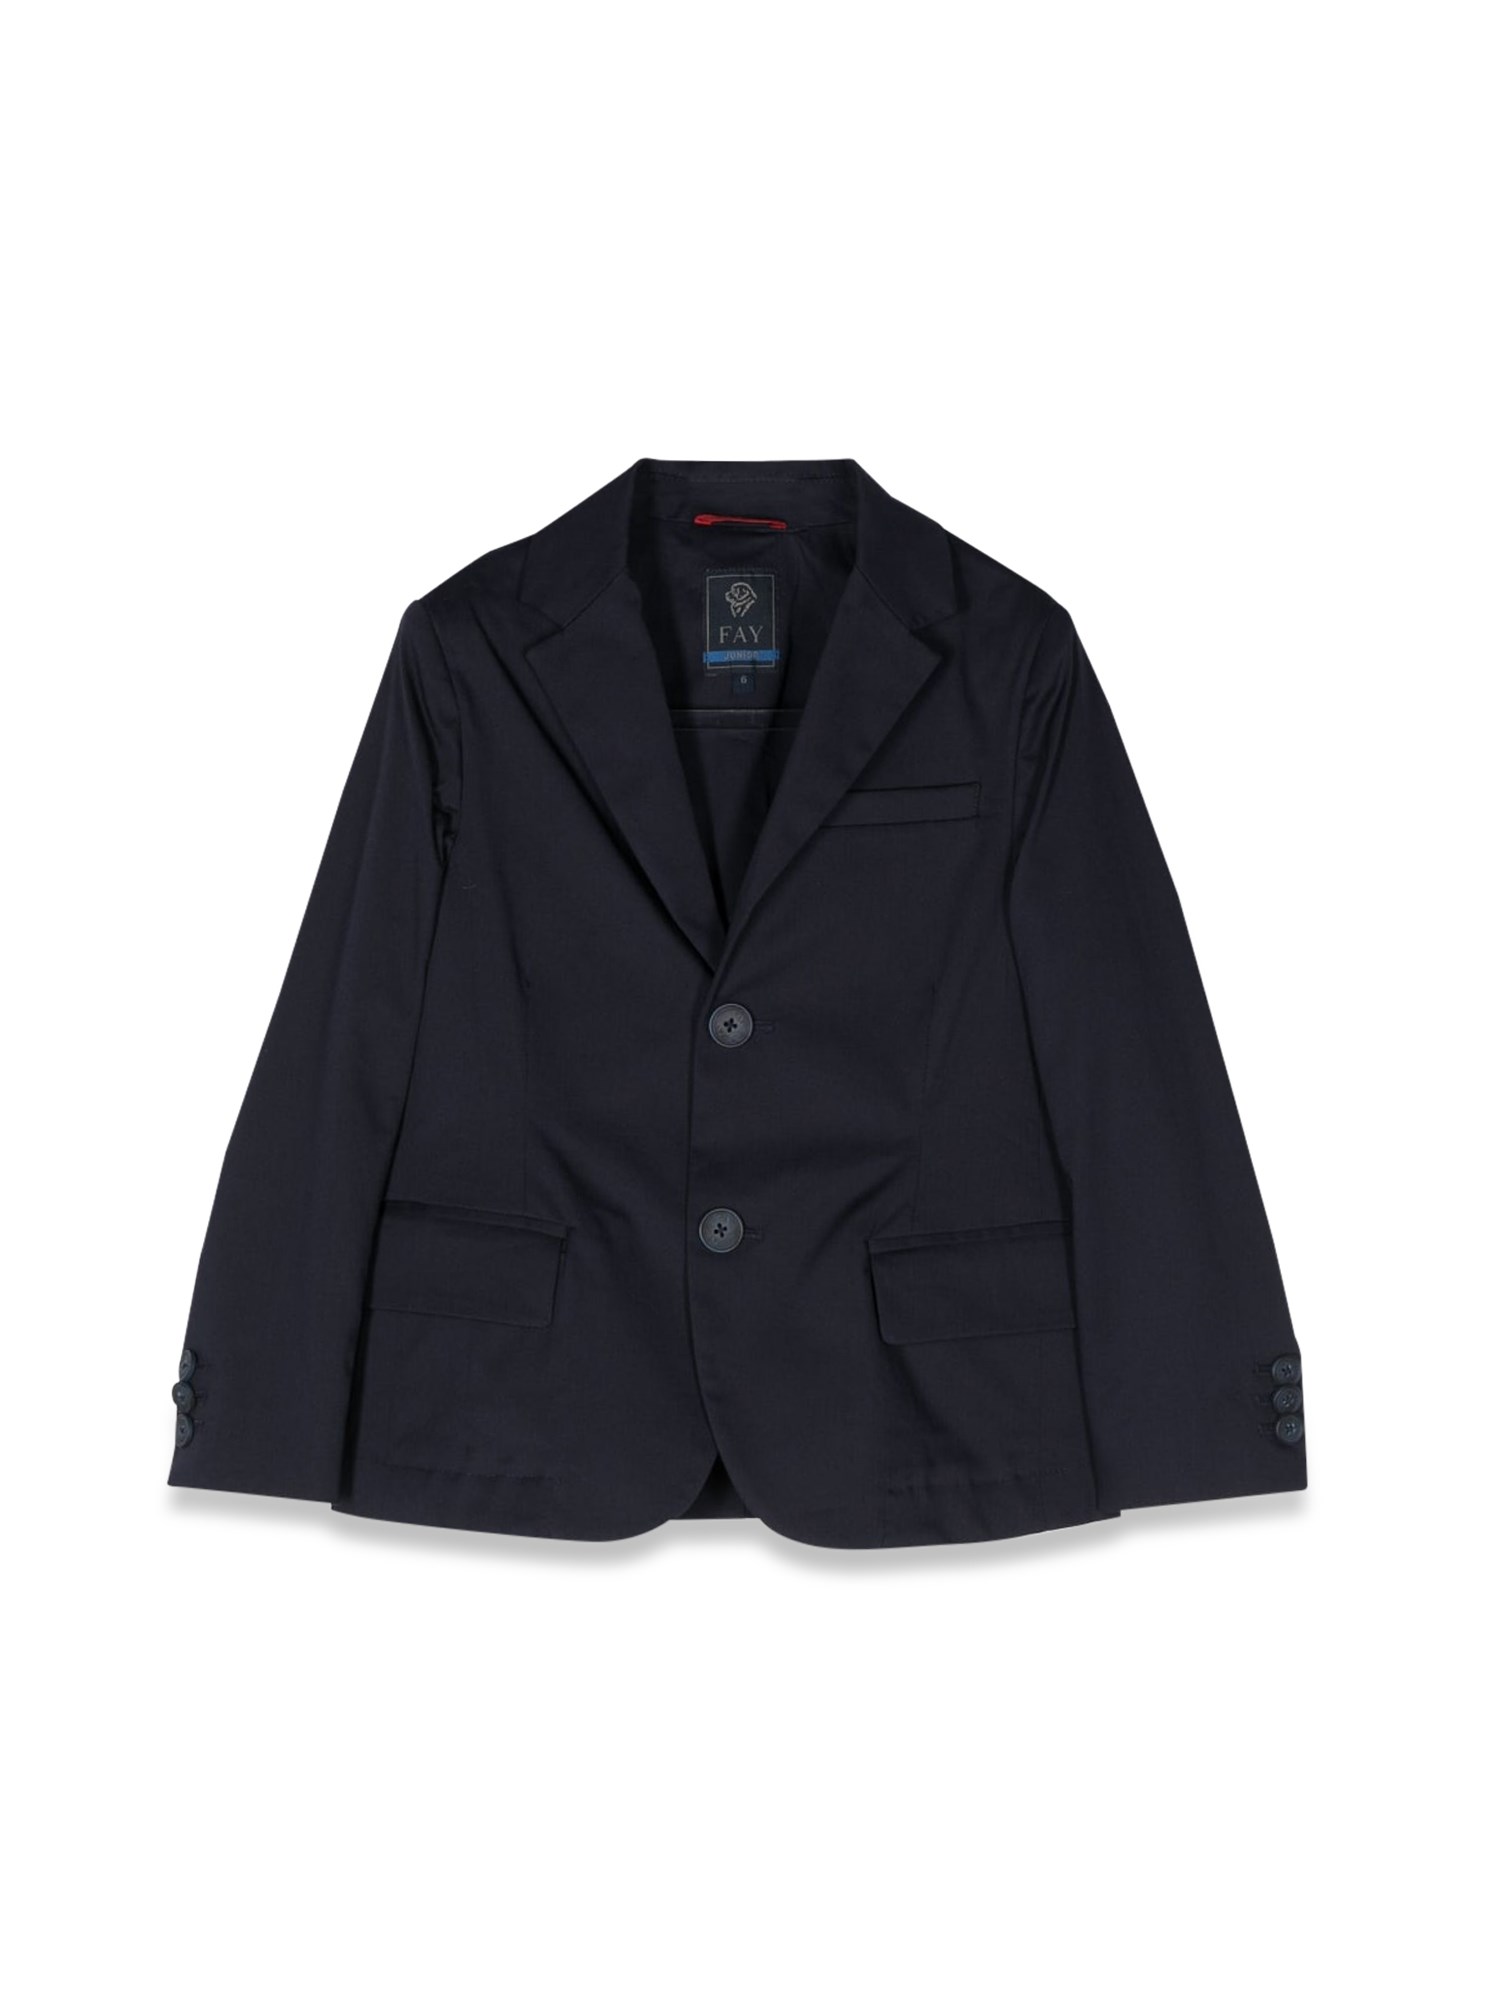 fay two-button jacket